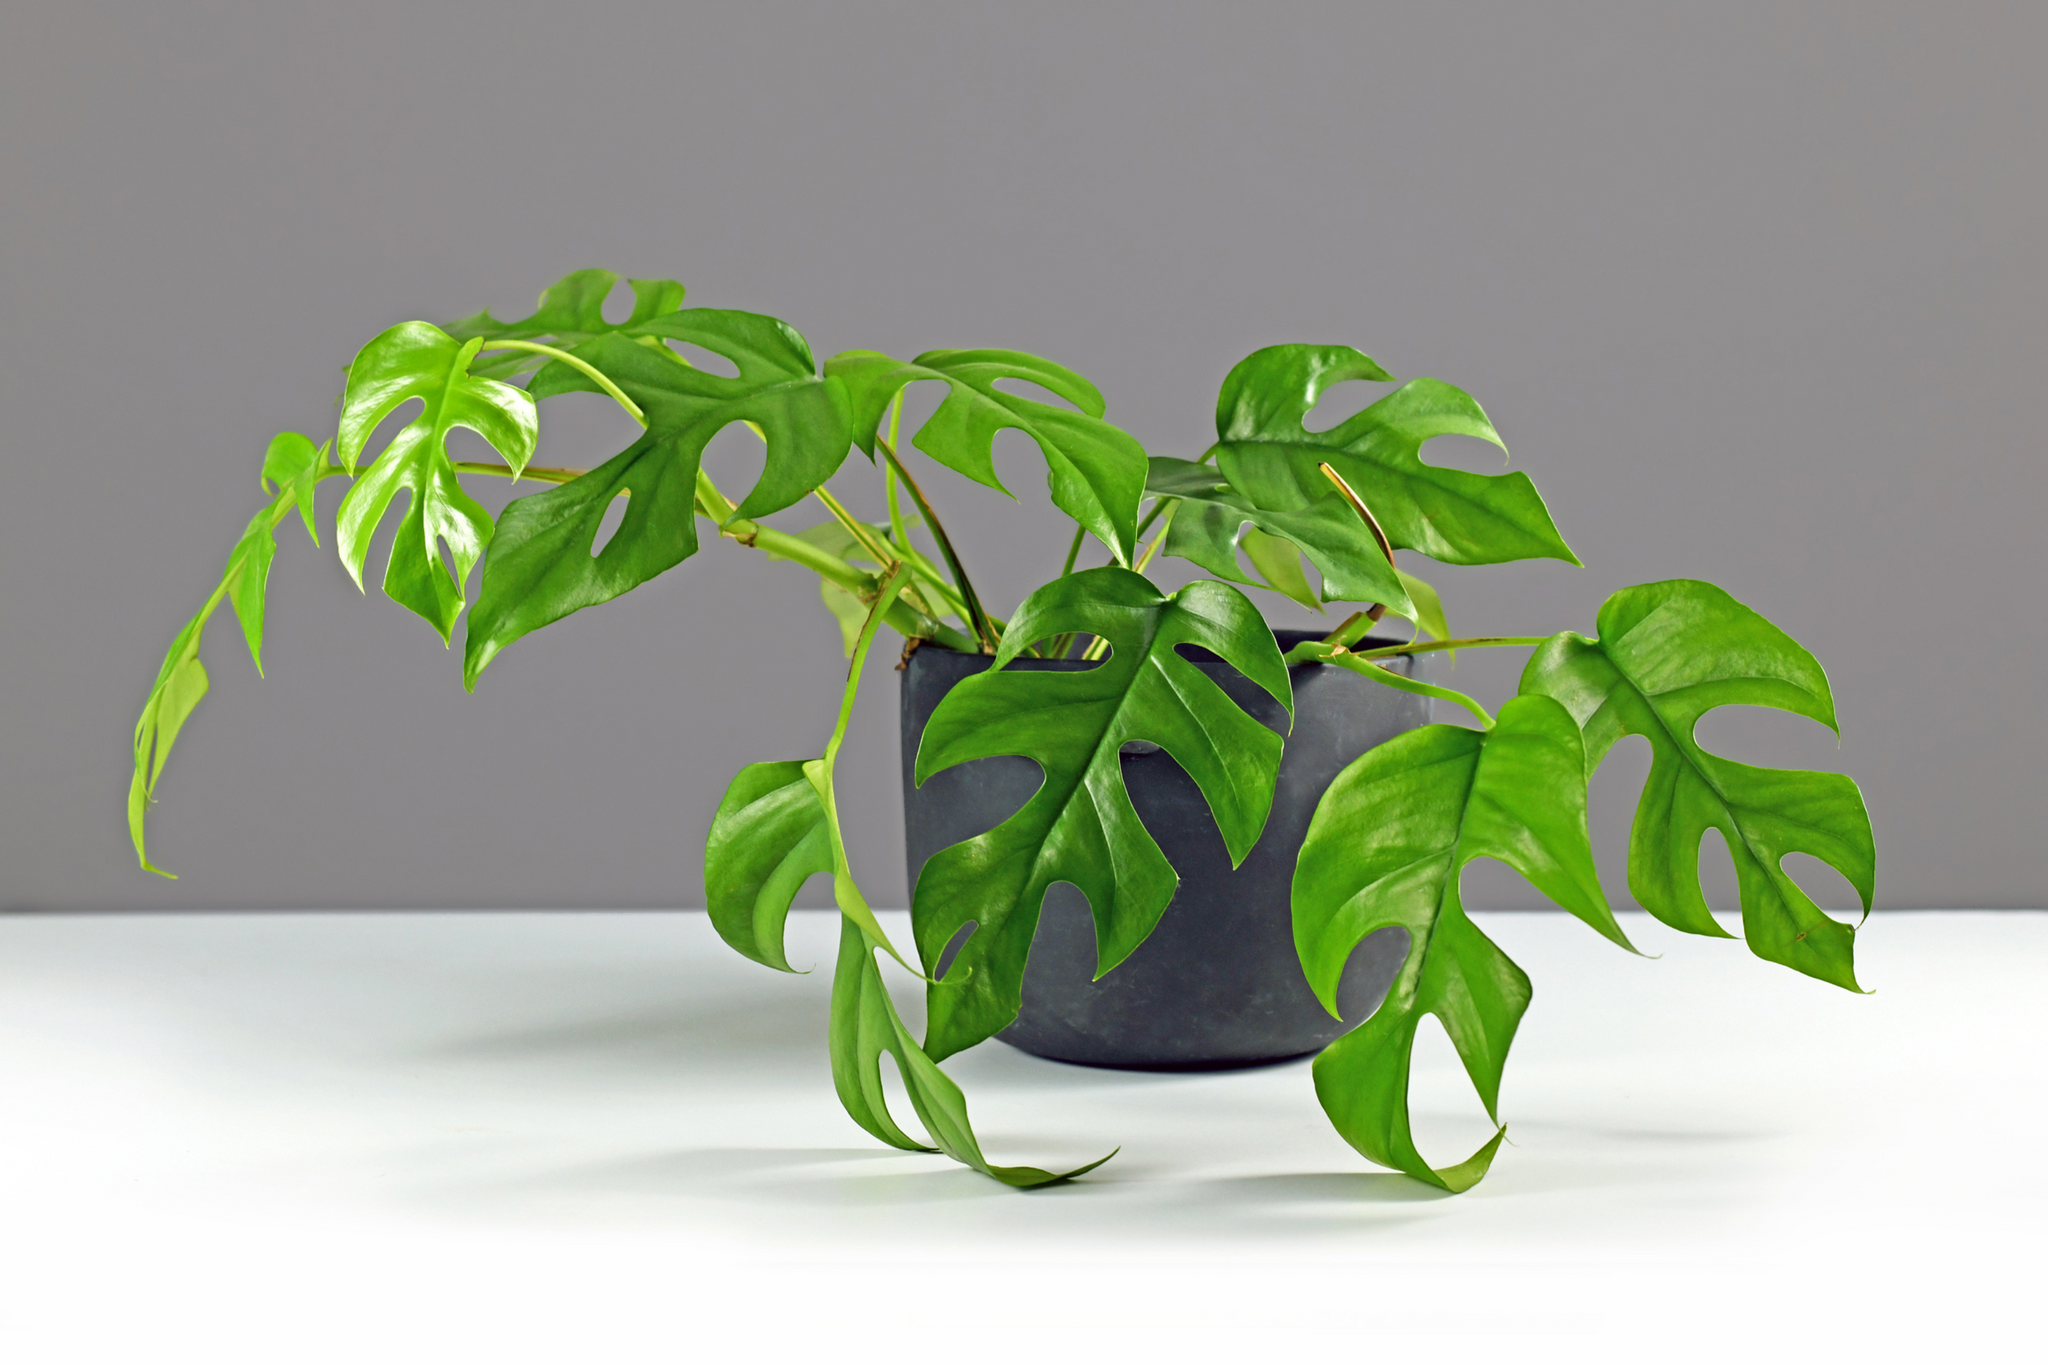 Photo of a mini monstera vining plant with fenestrated green leave in a black pot on a white and gray background